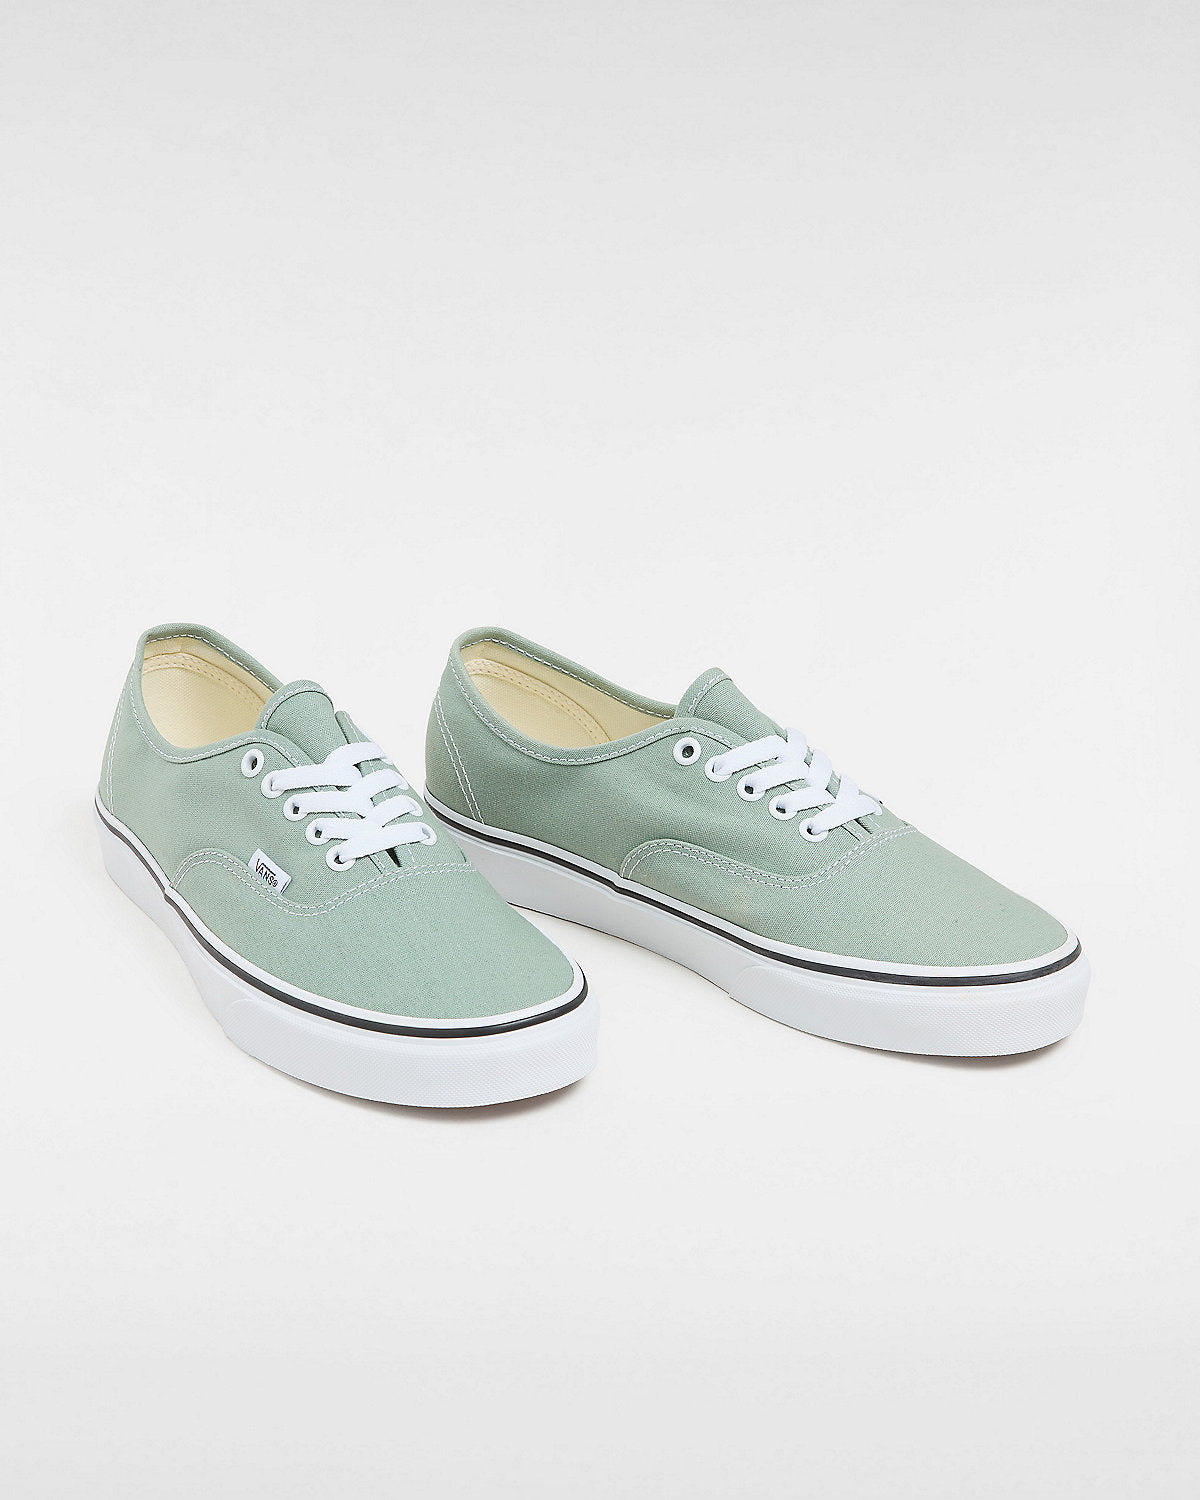 VANS Unisex Authentic Color Theory Trainers - Iceberg Green